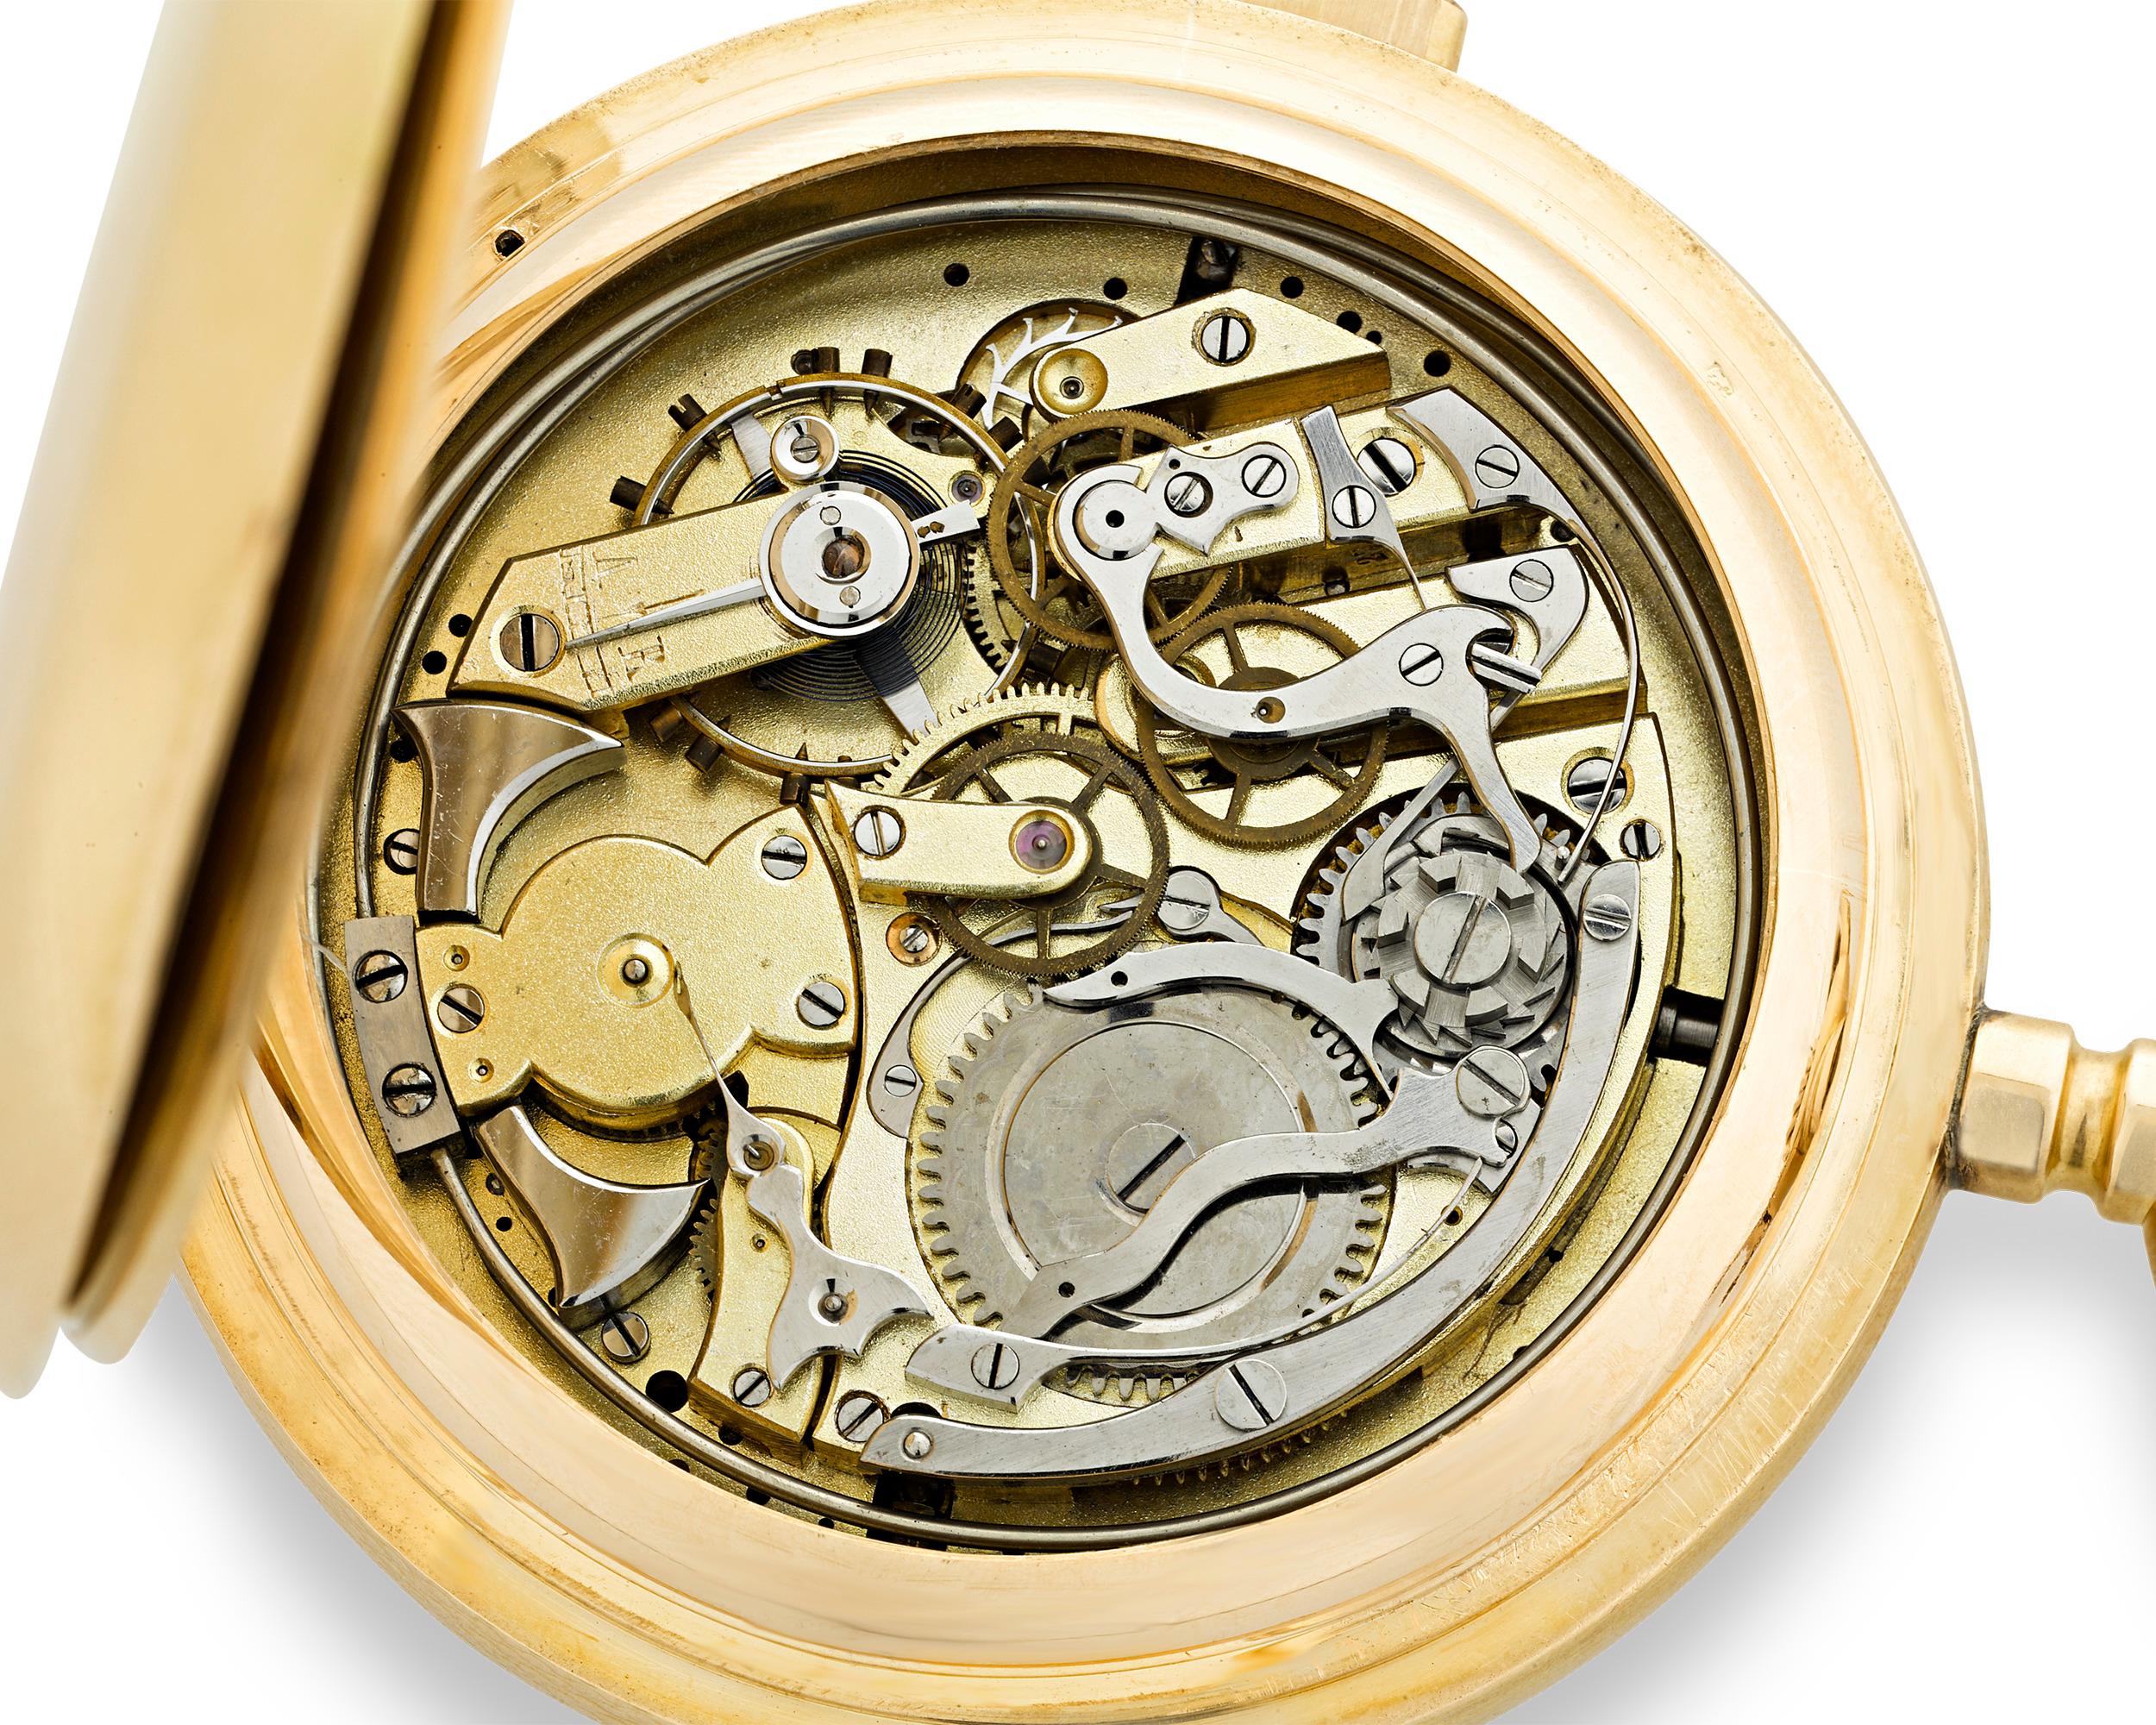 This rare minute repeater chronograph Fabrique Germinal pocket watch by Picard & Cie. is a stellar example of functional beauty. The timepiece features a complex movement with a triple-date calendar and moon phases and dials for the seconds, day,